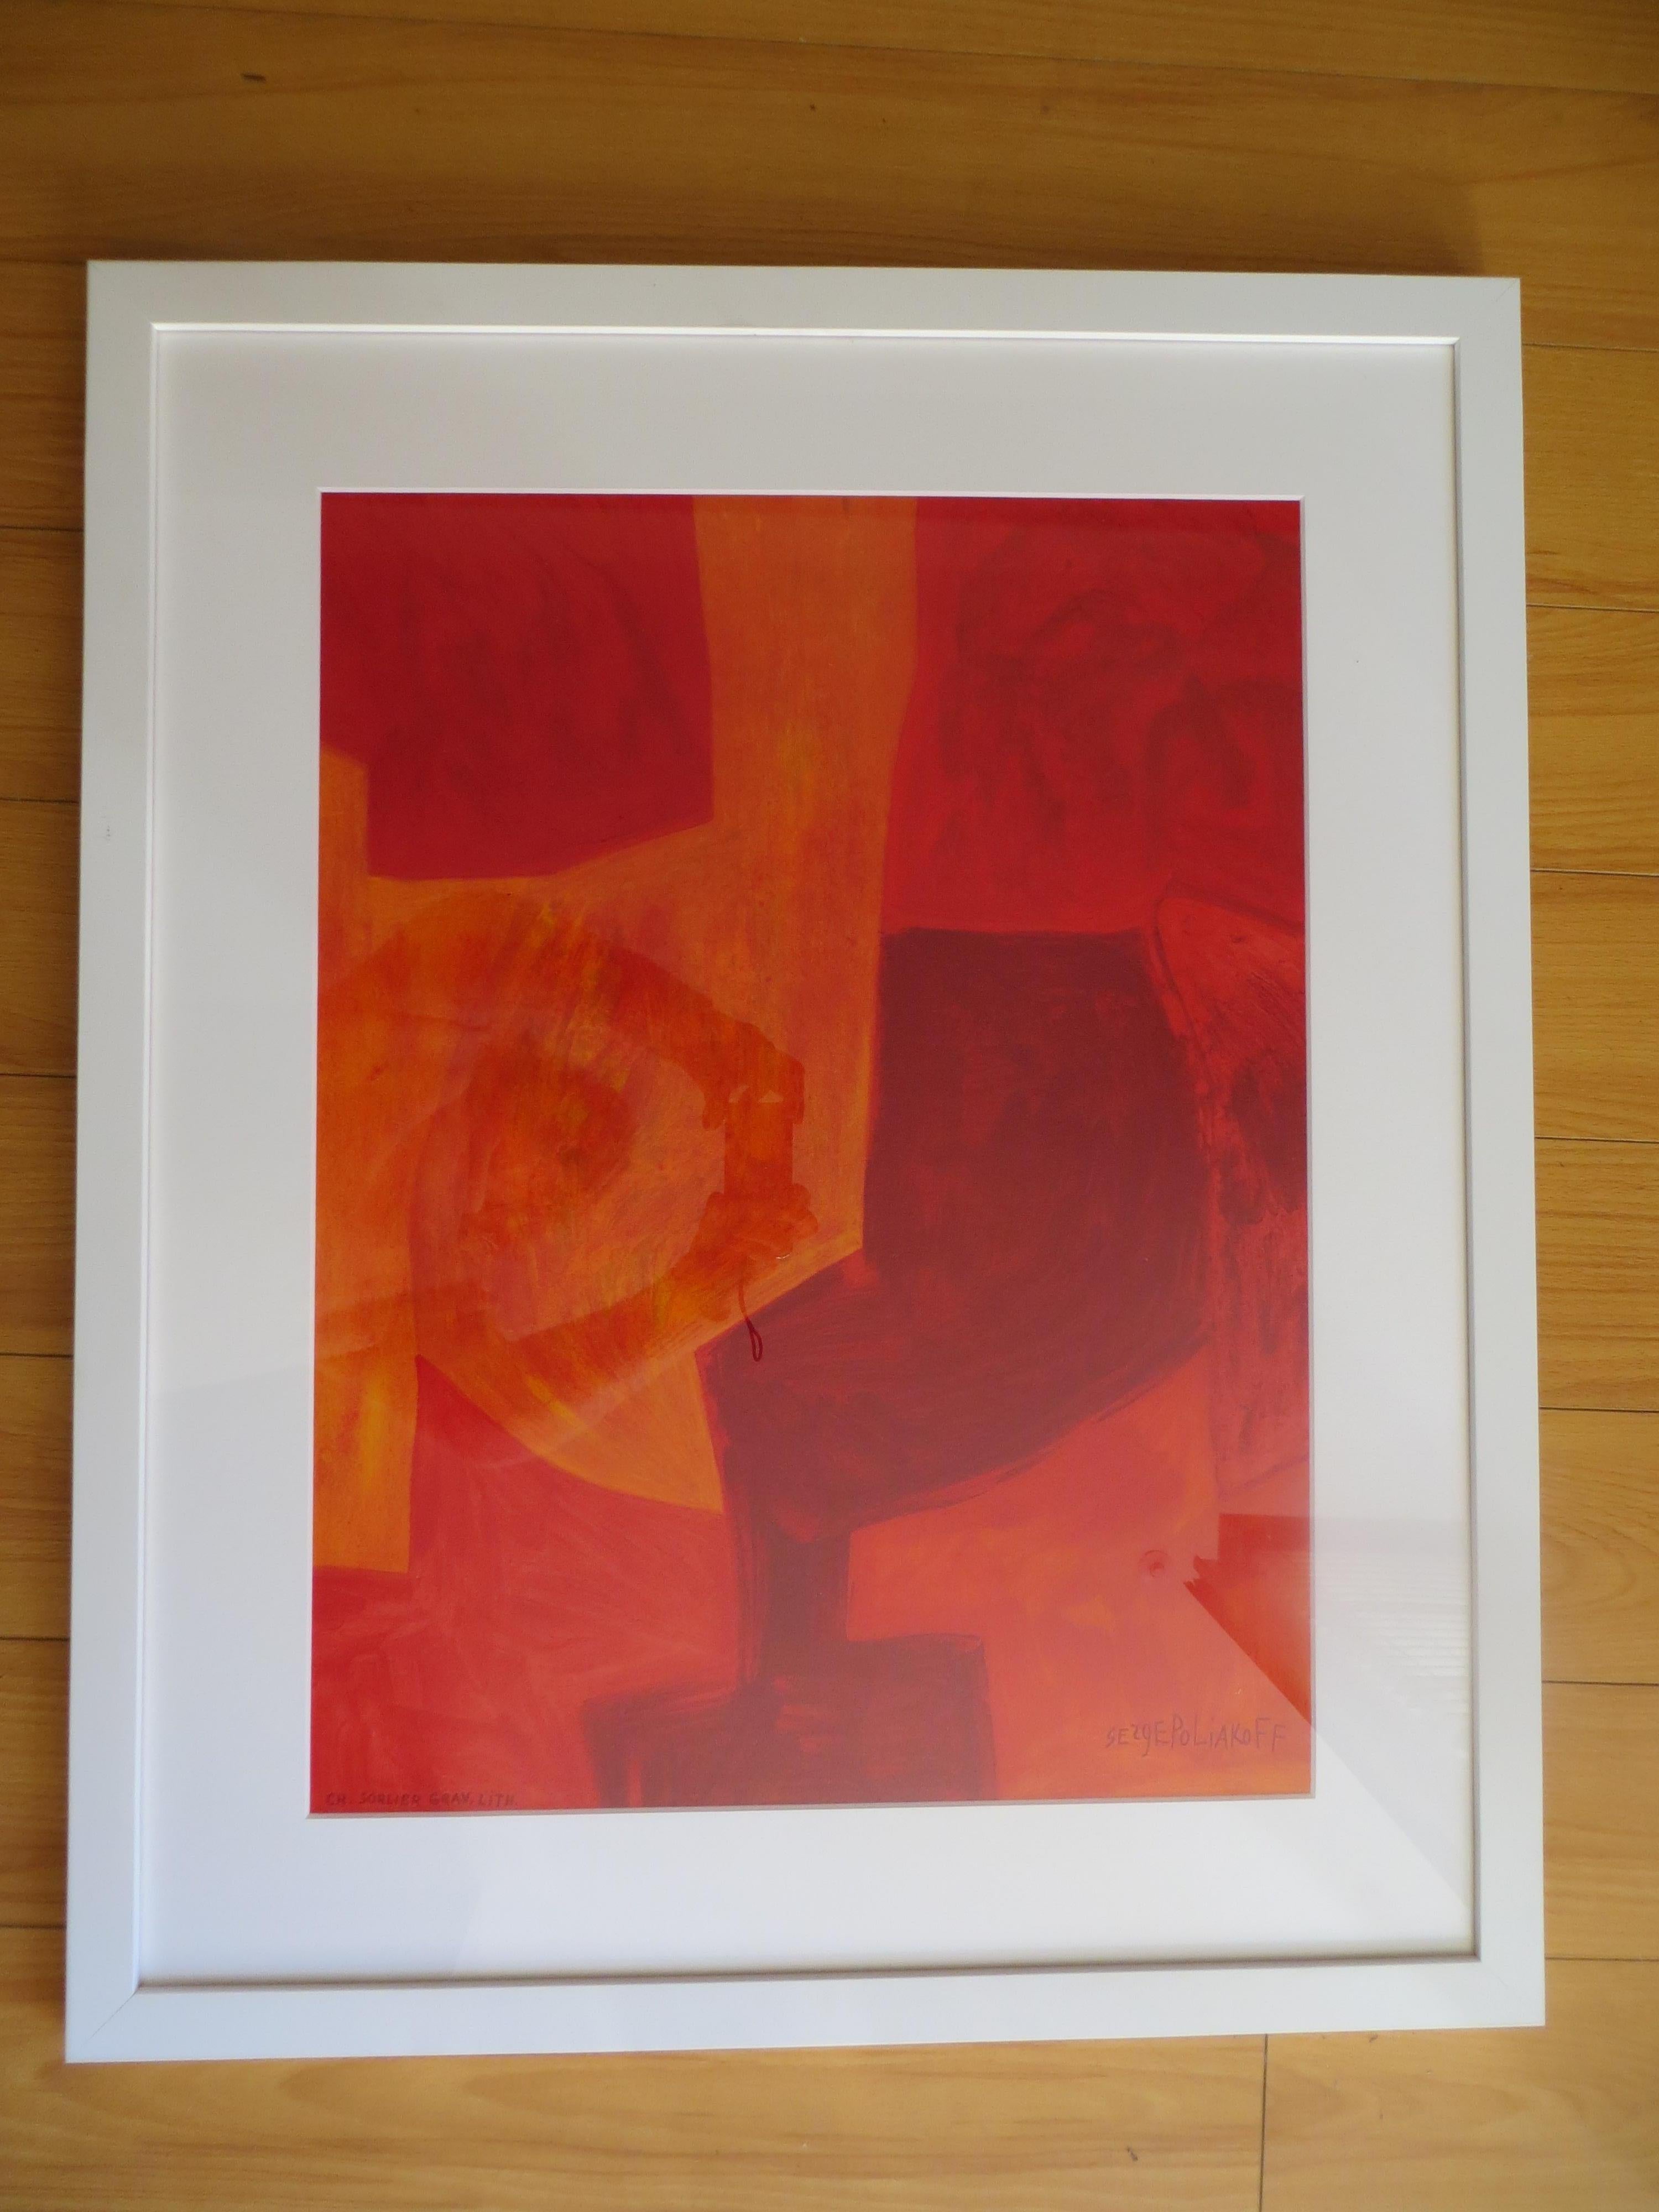 (After) Serge Poliakoff Abstract Print - Serge Poliakoff, Composition 1975, Lithograph Printed by Charles Sorlier